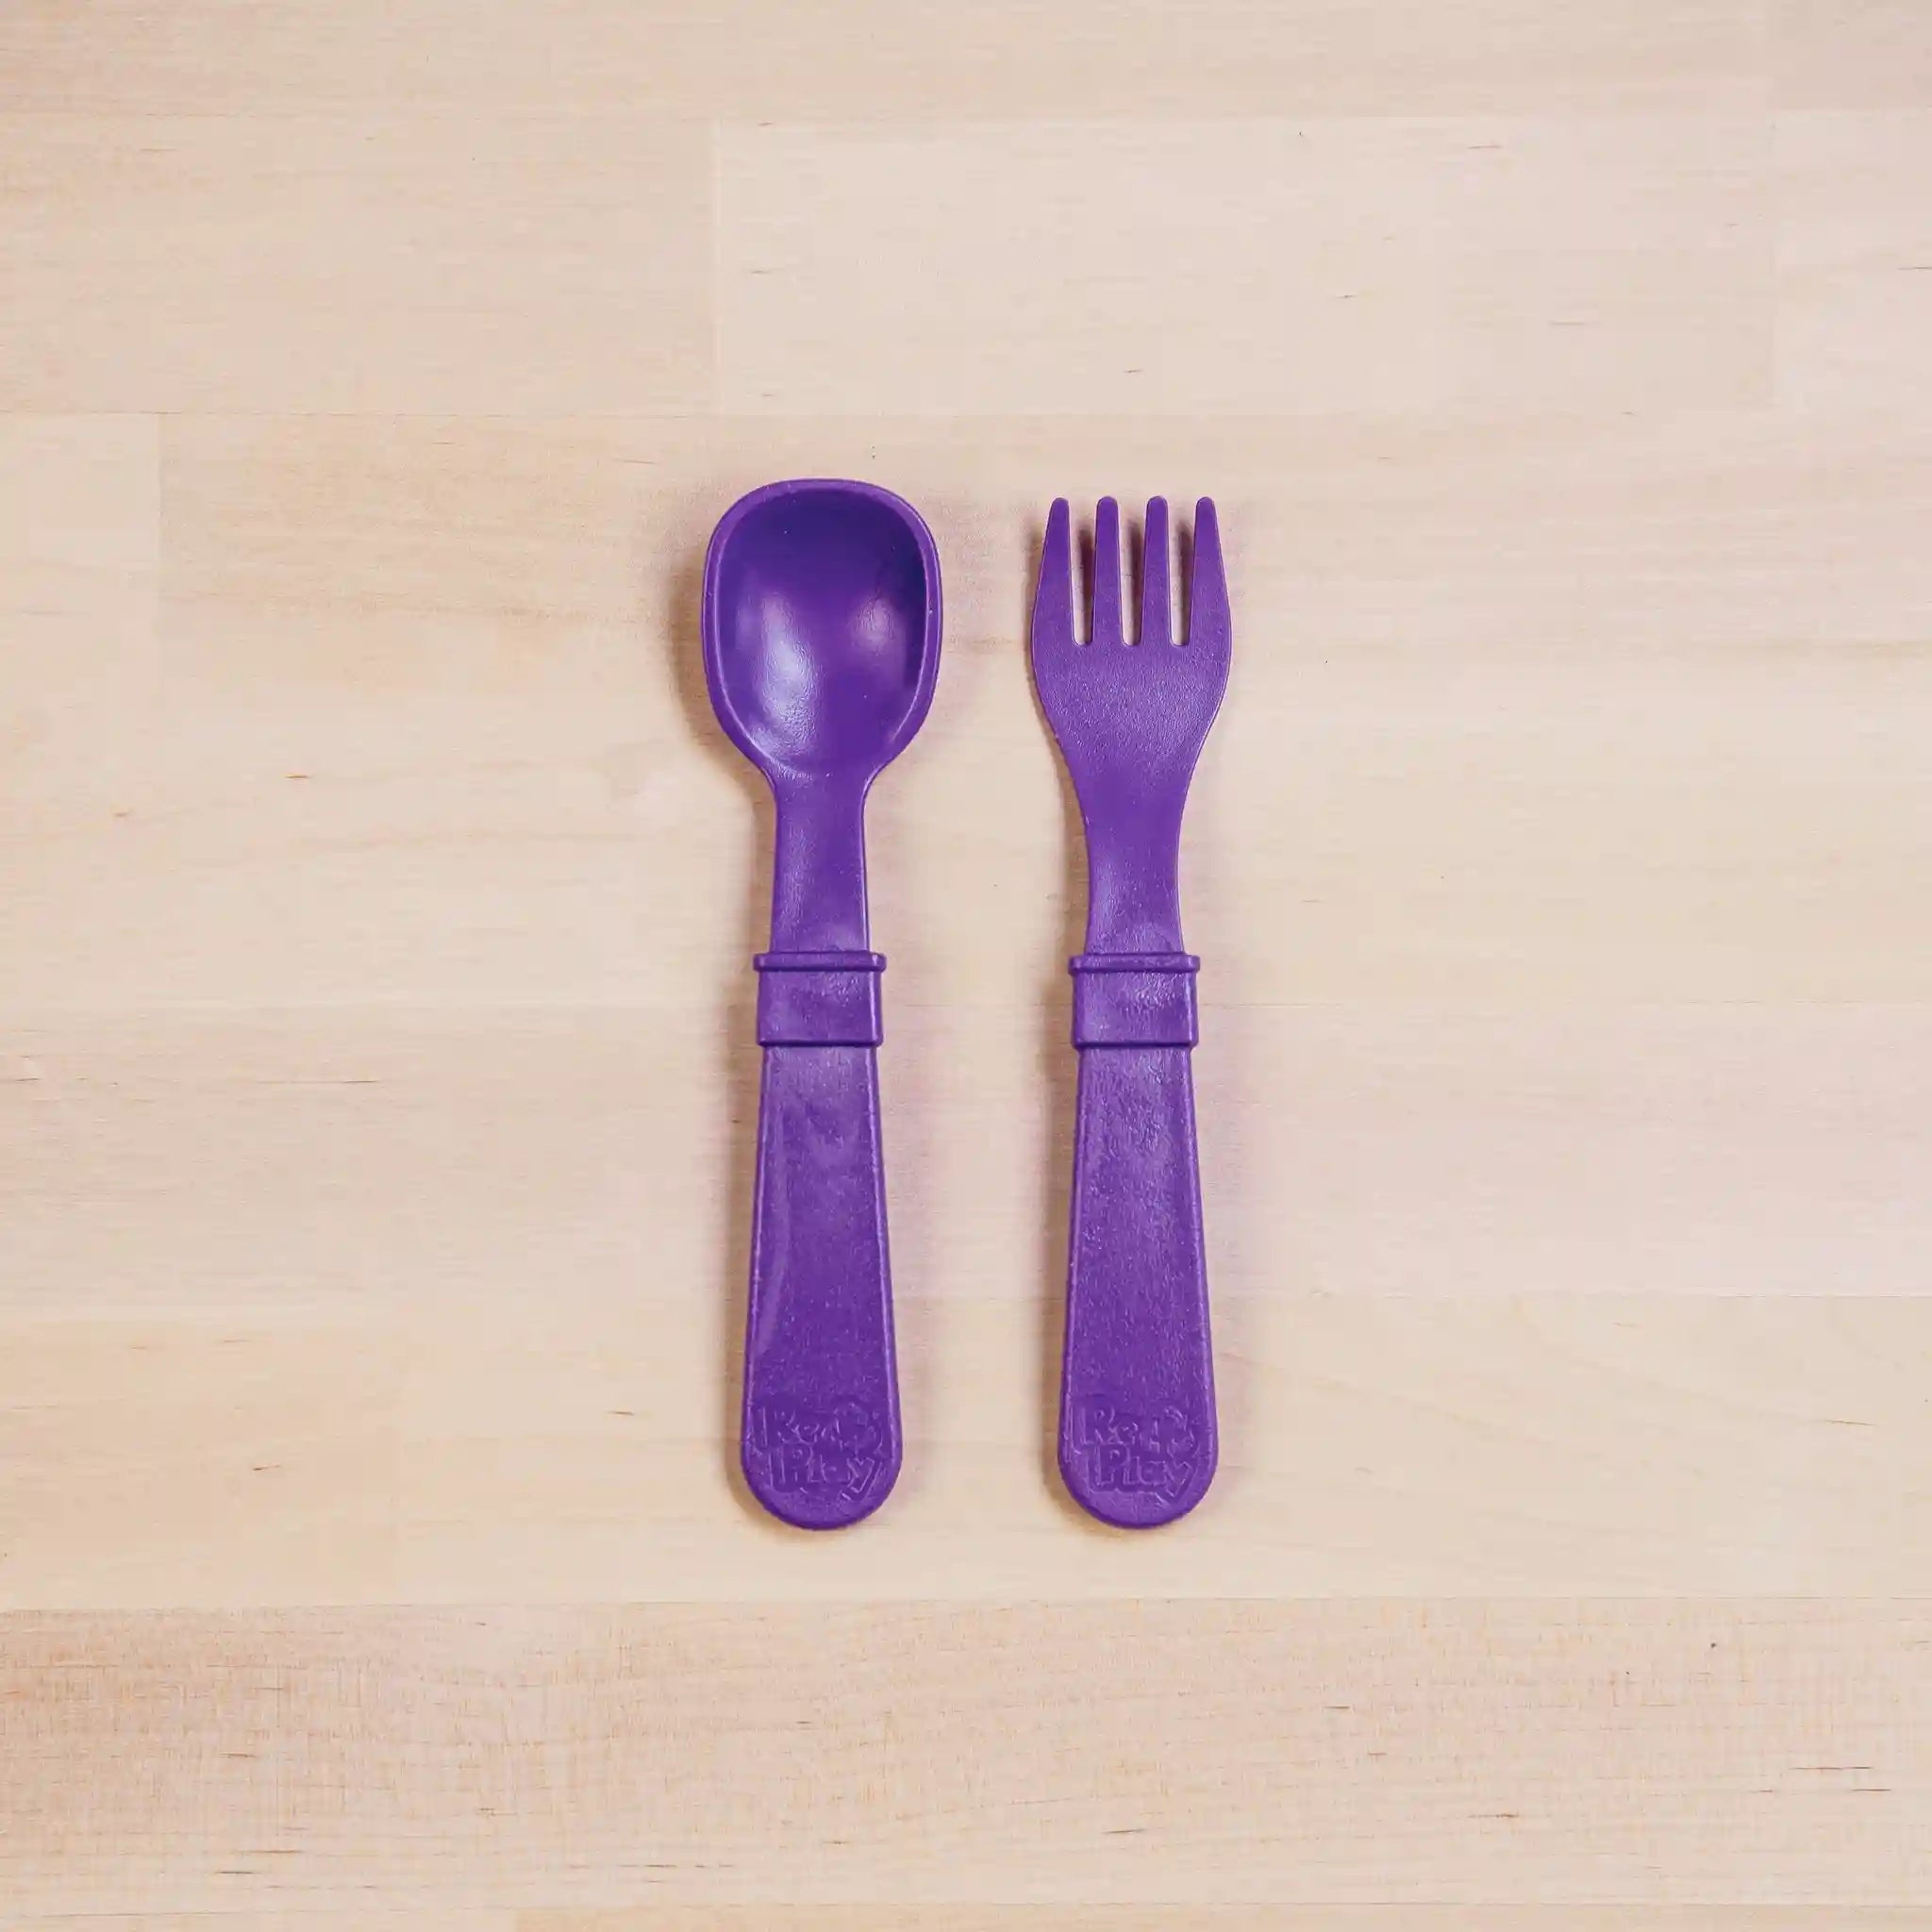 Re-Play - Packaged Utensils (Spoons And Forks) - Princess - Pack of 8